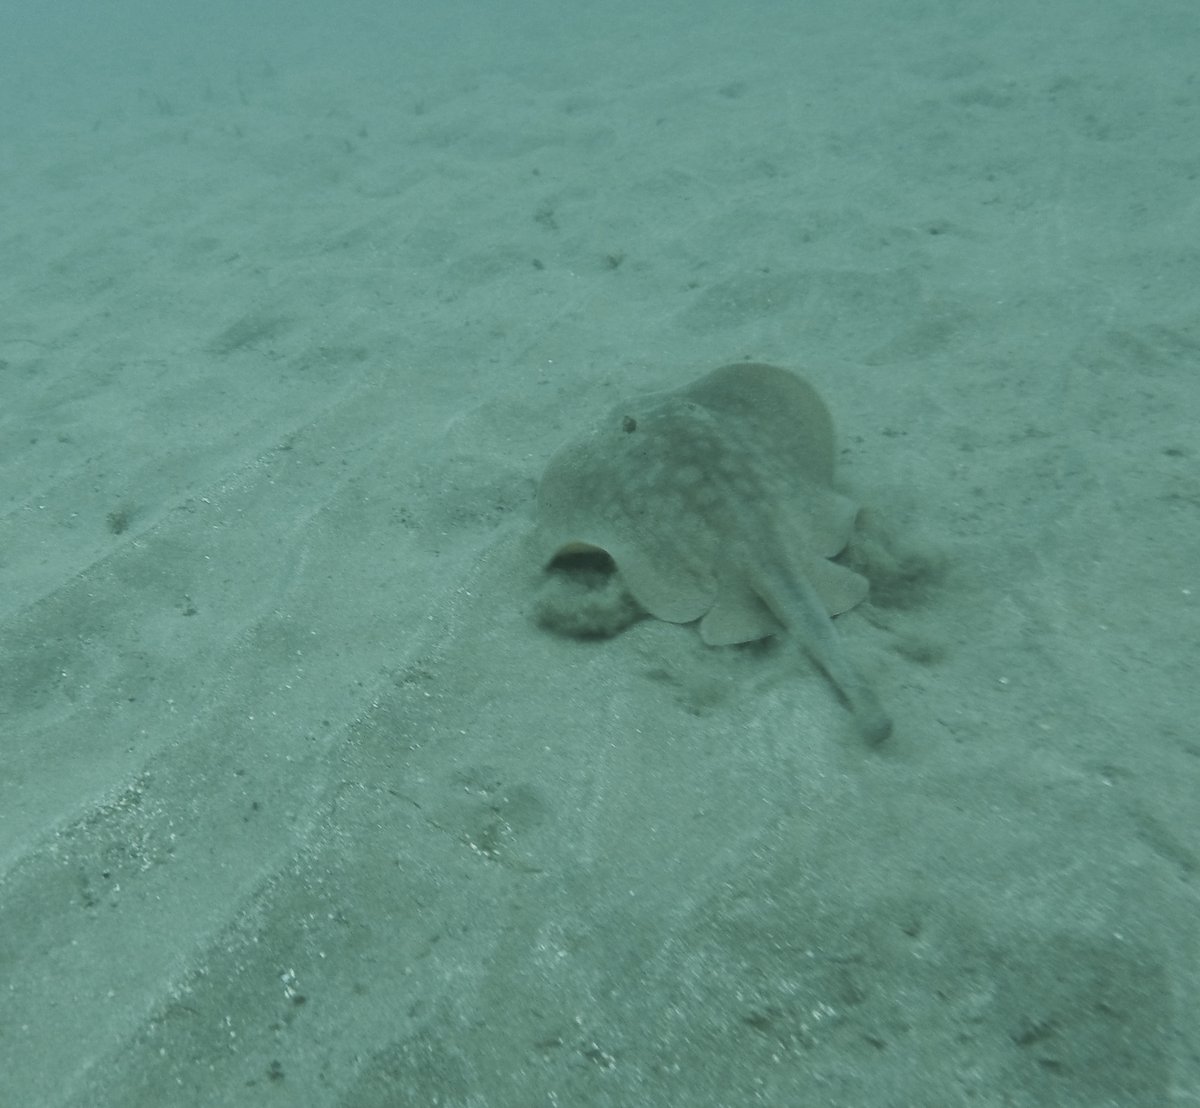 Did you know, round stingrays are chondrichthyes, just like sharks? They have a completely cartilaginous skeleton, with no bones!  🤓 🌊 🦈  #cimiscience #fishfriday #roundstingray #chondrichthyes #stingrayshuffle #sandybottom #catalinaisland